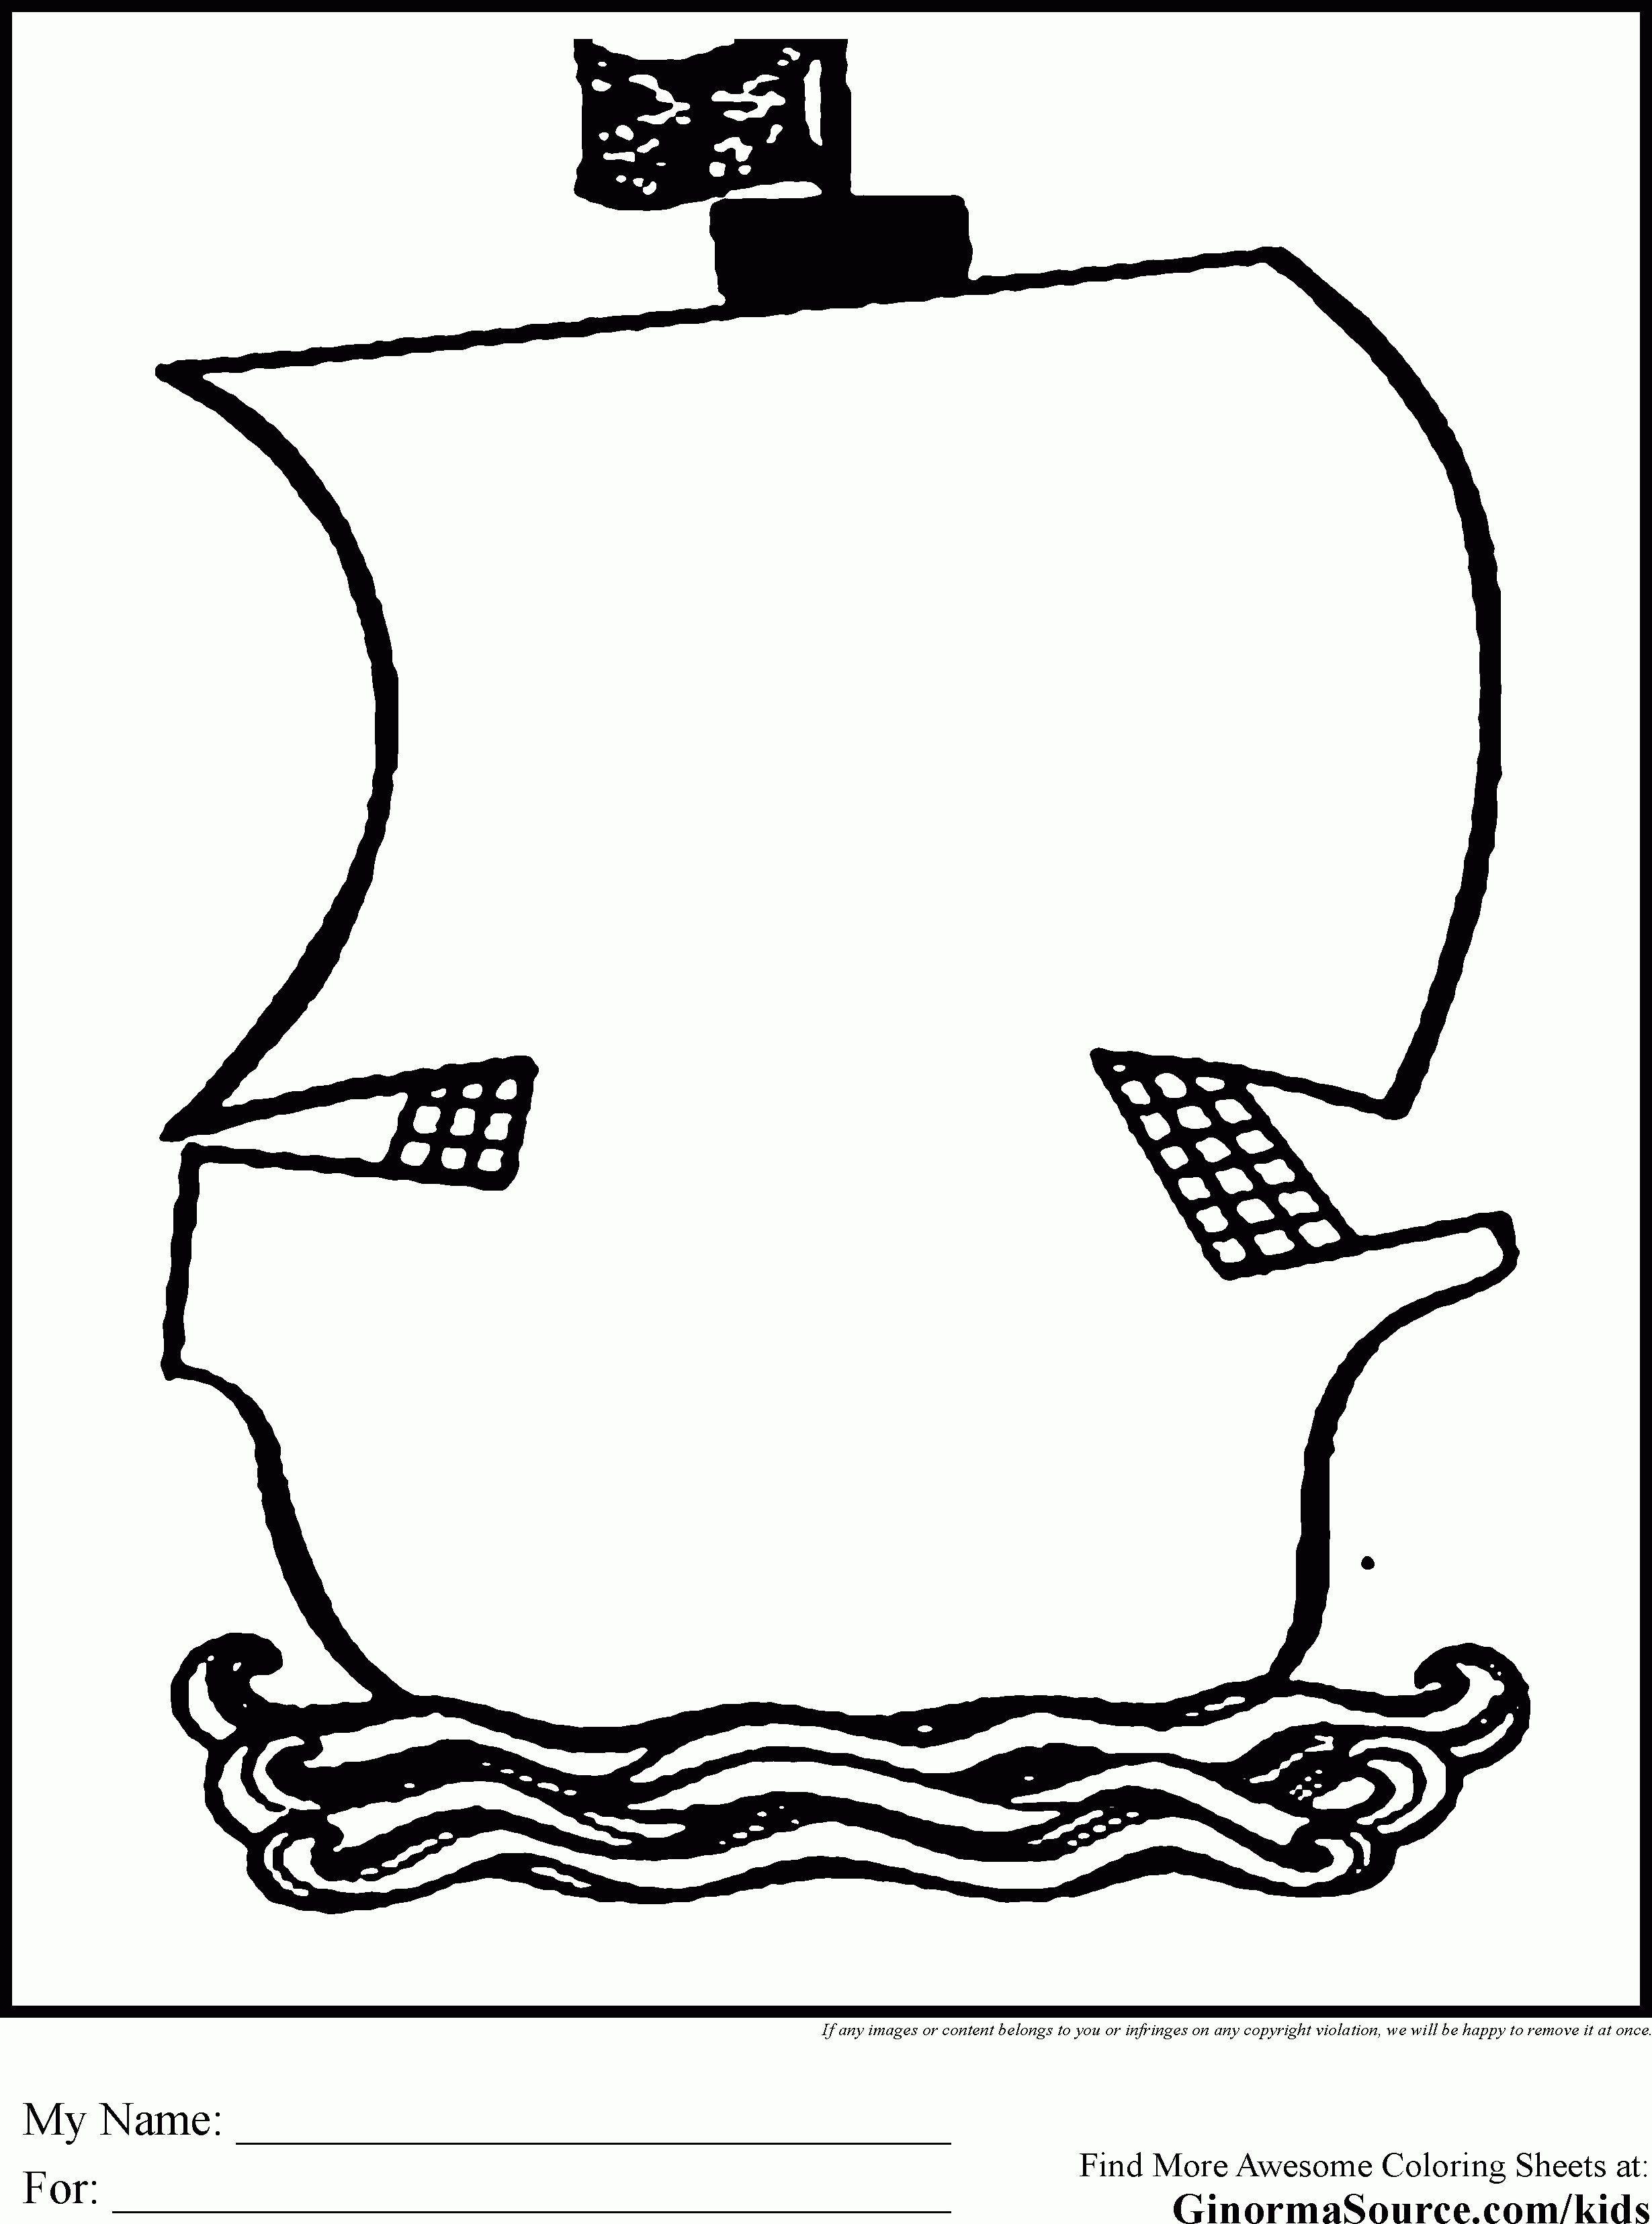 A Treasure Chest With Pirate Marks Coloring Page Kids Play Color ...